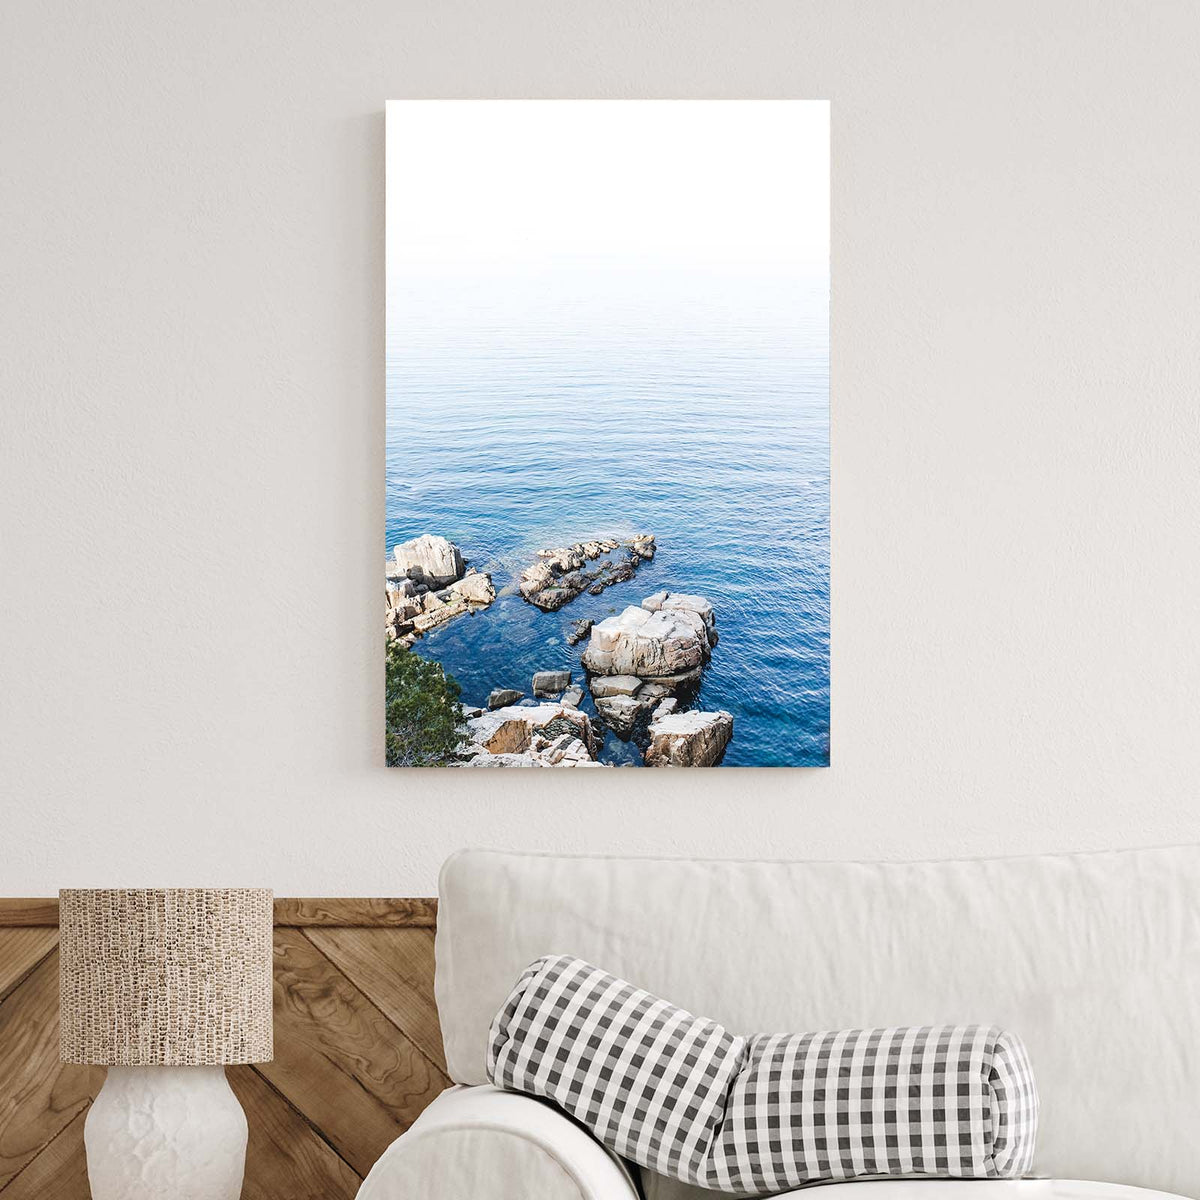 Infinit - Canvas Print by The Caviness Collective | Art Bloom Canvas Art